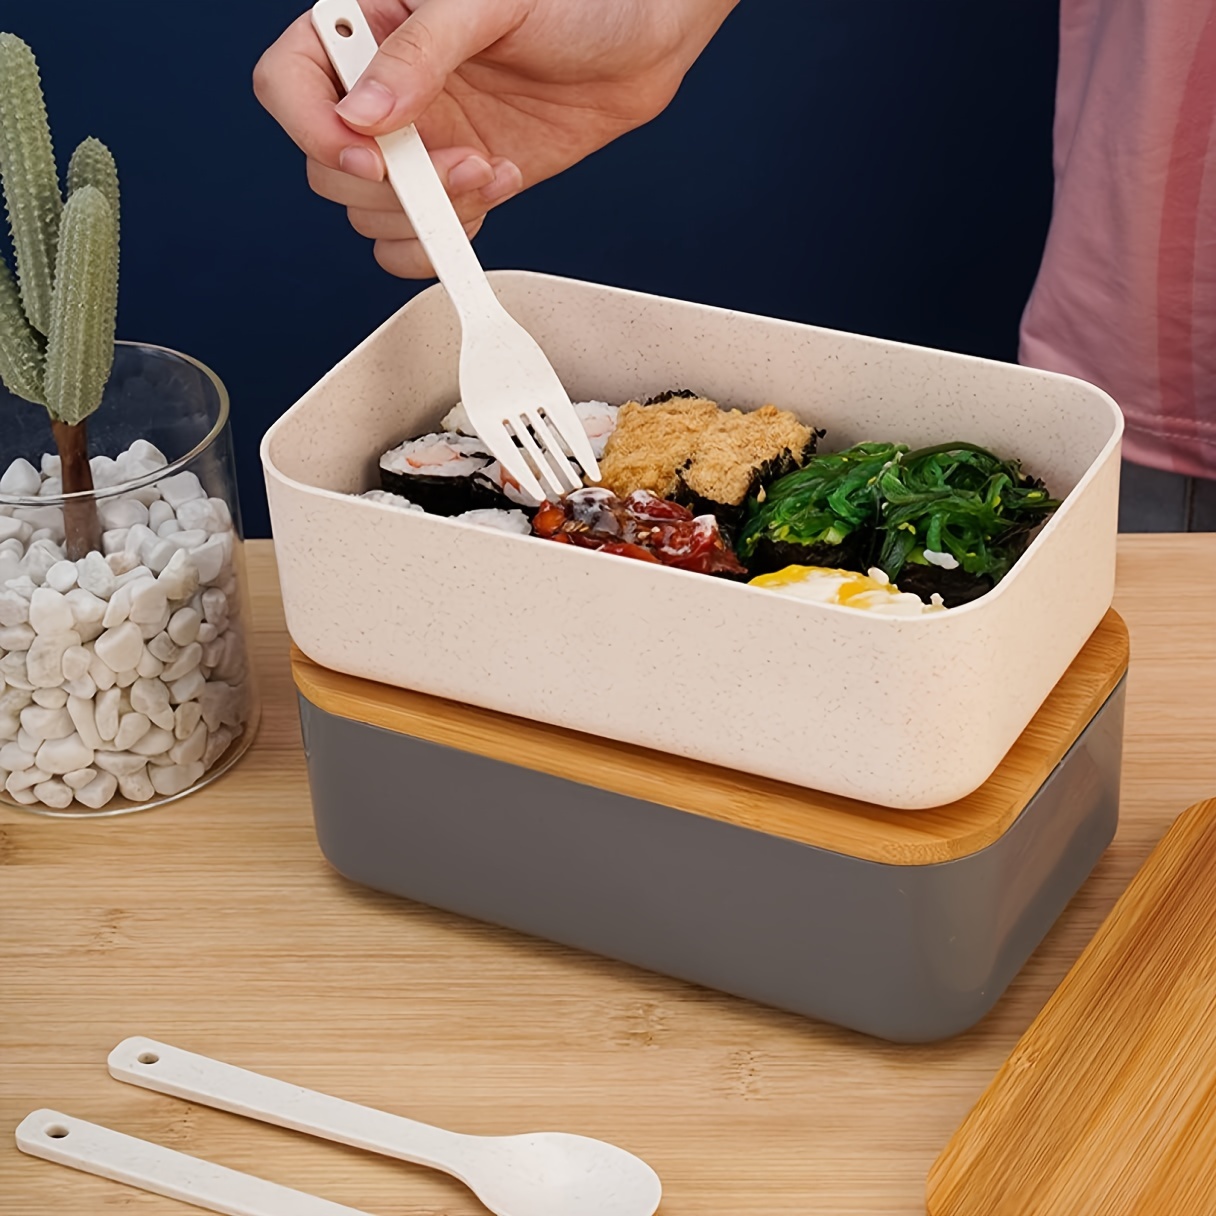 Lunchbox avec couverts BAMBOU